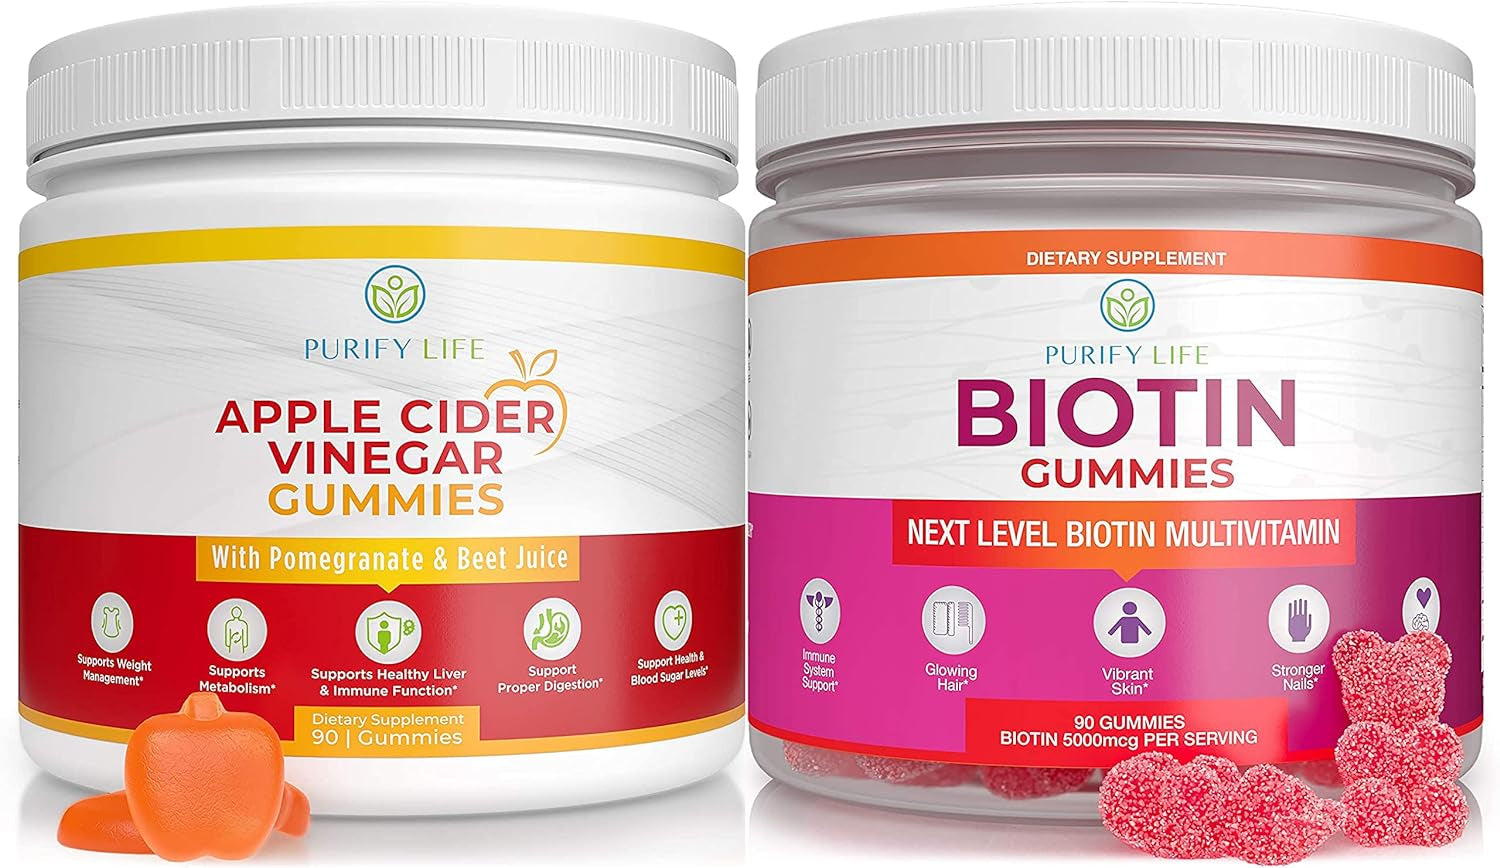 Purify Life Apple Cider Vinegar & Biotin Bundle, Gummies for Hair Skin and Nails (Bulk - 90 Chews), Gut Health & Digestion, Immune Support, Detox, Metabolism- No Capsules, Pills, Tablets or Syrup